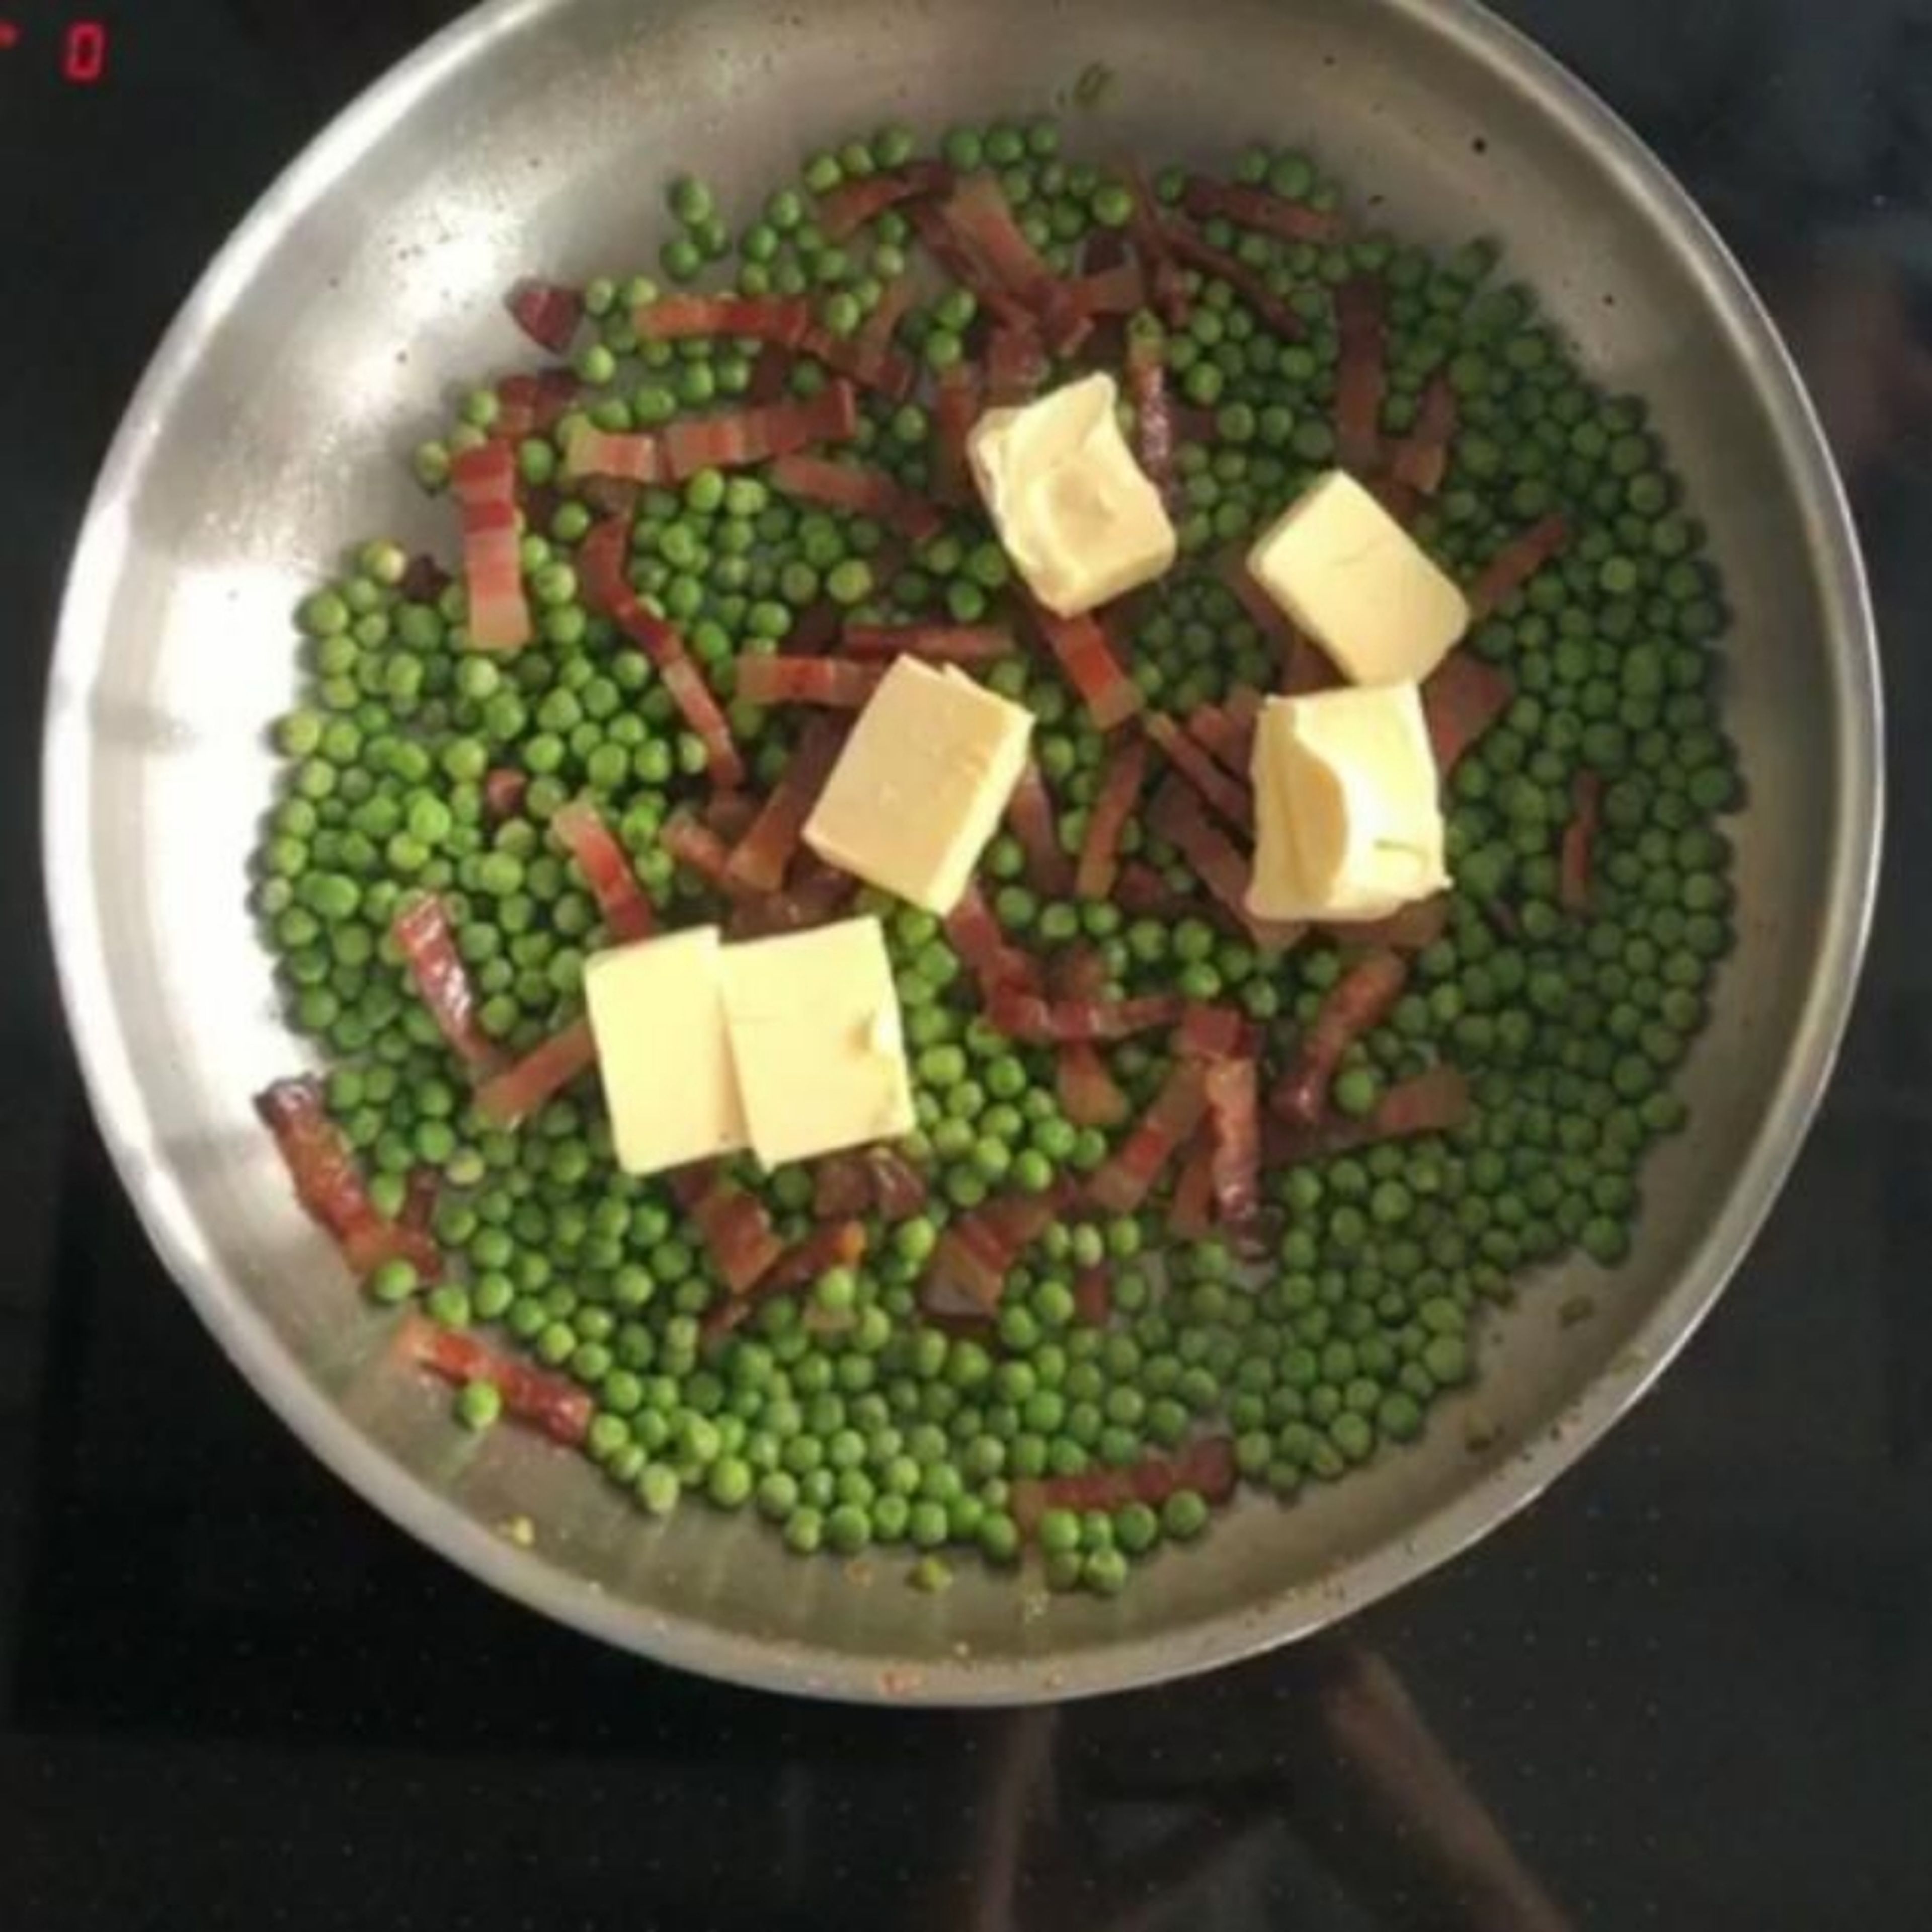 Add frozen peas to the bacon and shake the pan vigorously. After about 1 minute, stir in the cream along with the butter. Add the cooked pasta to the pan with a bit of the cooking water. Then pour in lemon juice and season with salt and pepper. Let the pasta simmer briefly and remove from heat.